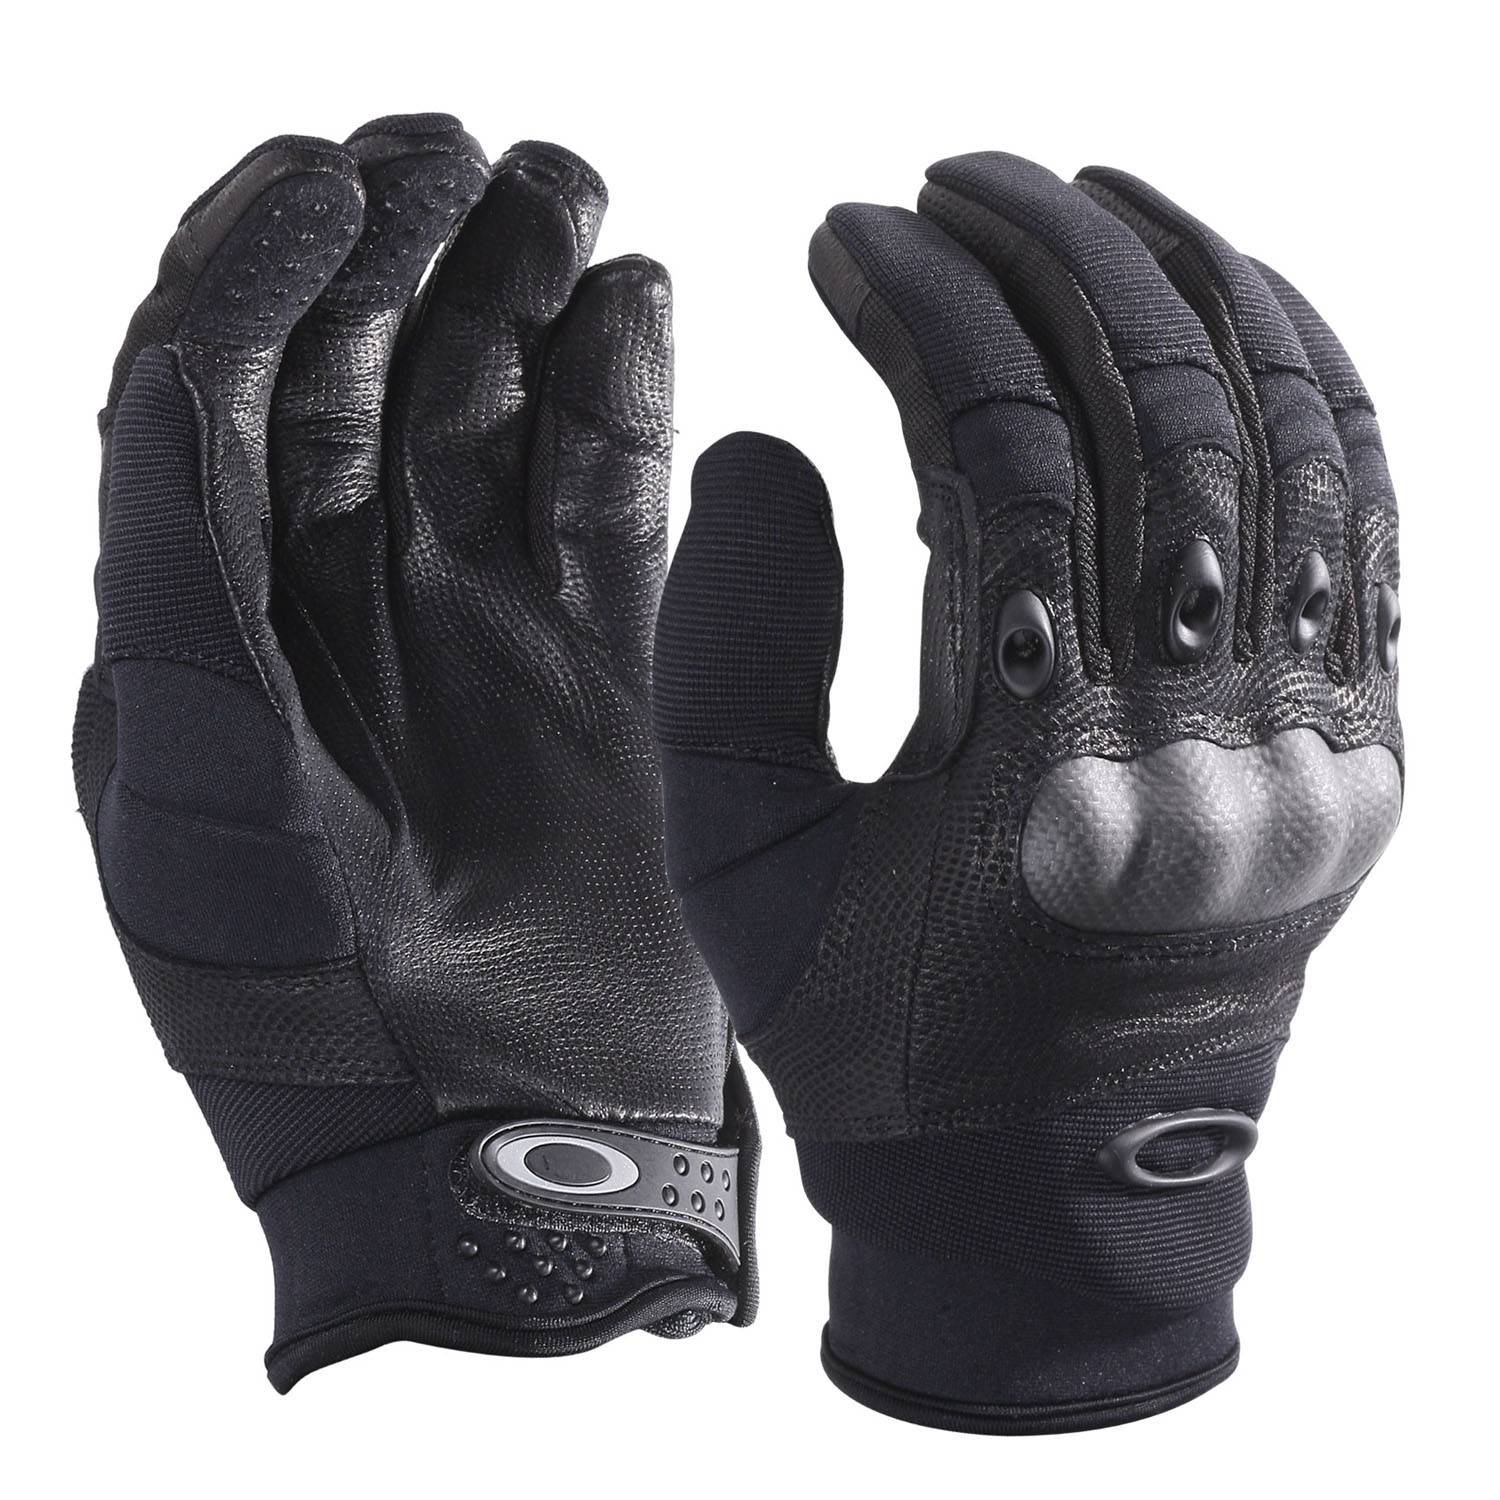 OAKLEY SI PILOT TACTICAL MILITARY GLOVES